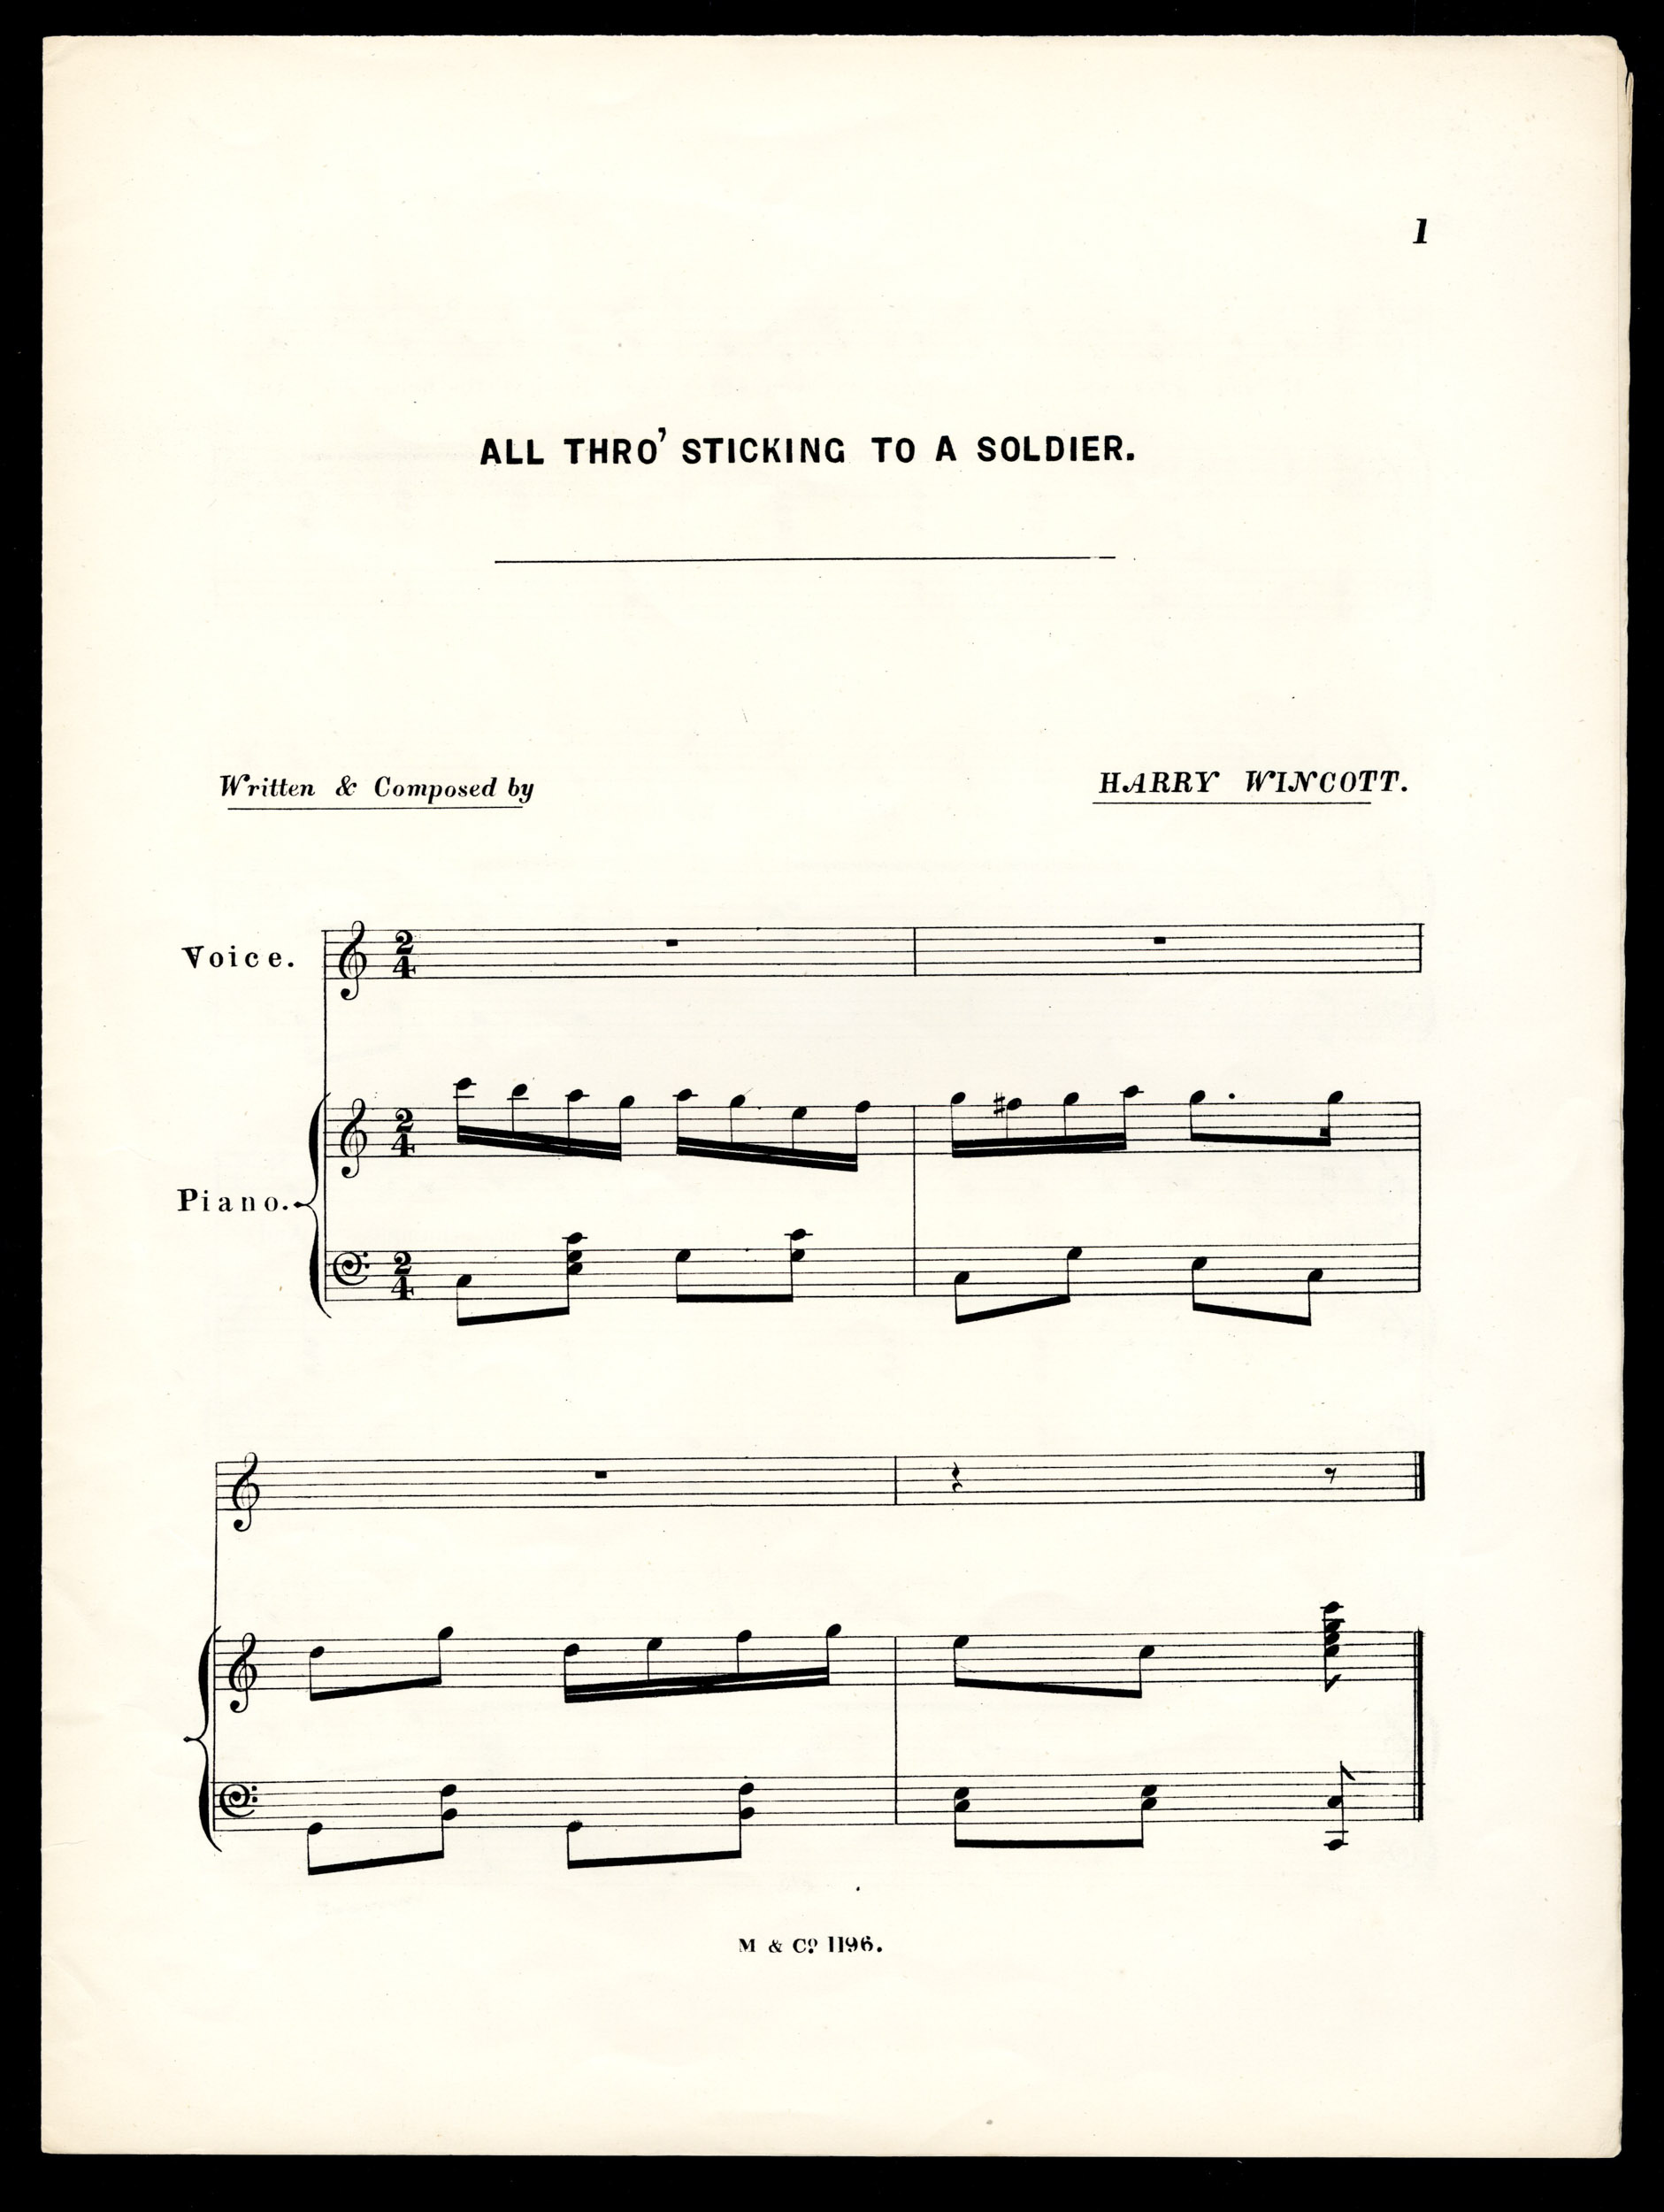 Musical score for 'All Thro' Sticking to a Soldier' sung by Miss Ada Lundberg, from the Max Tyler Music Hall collection